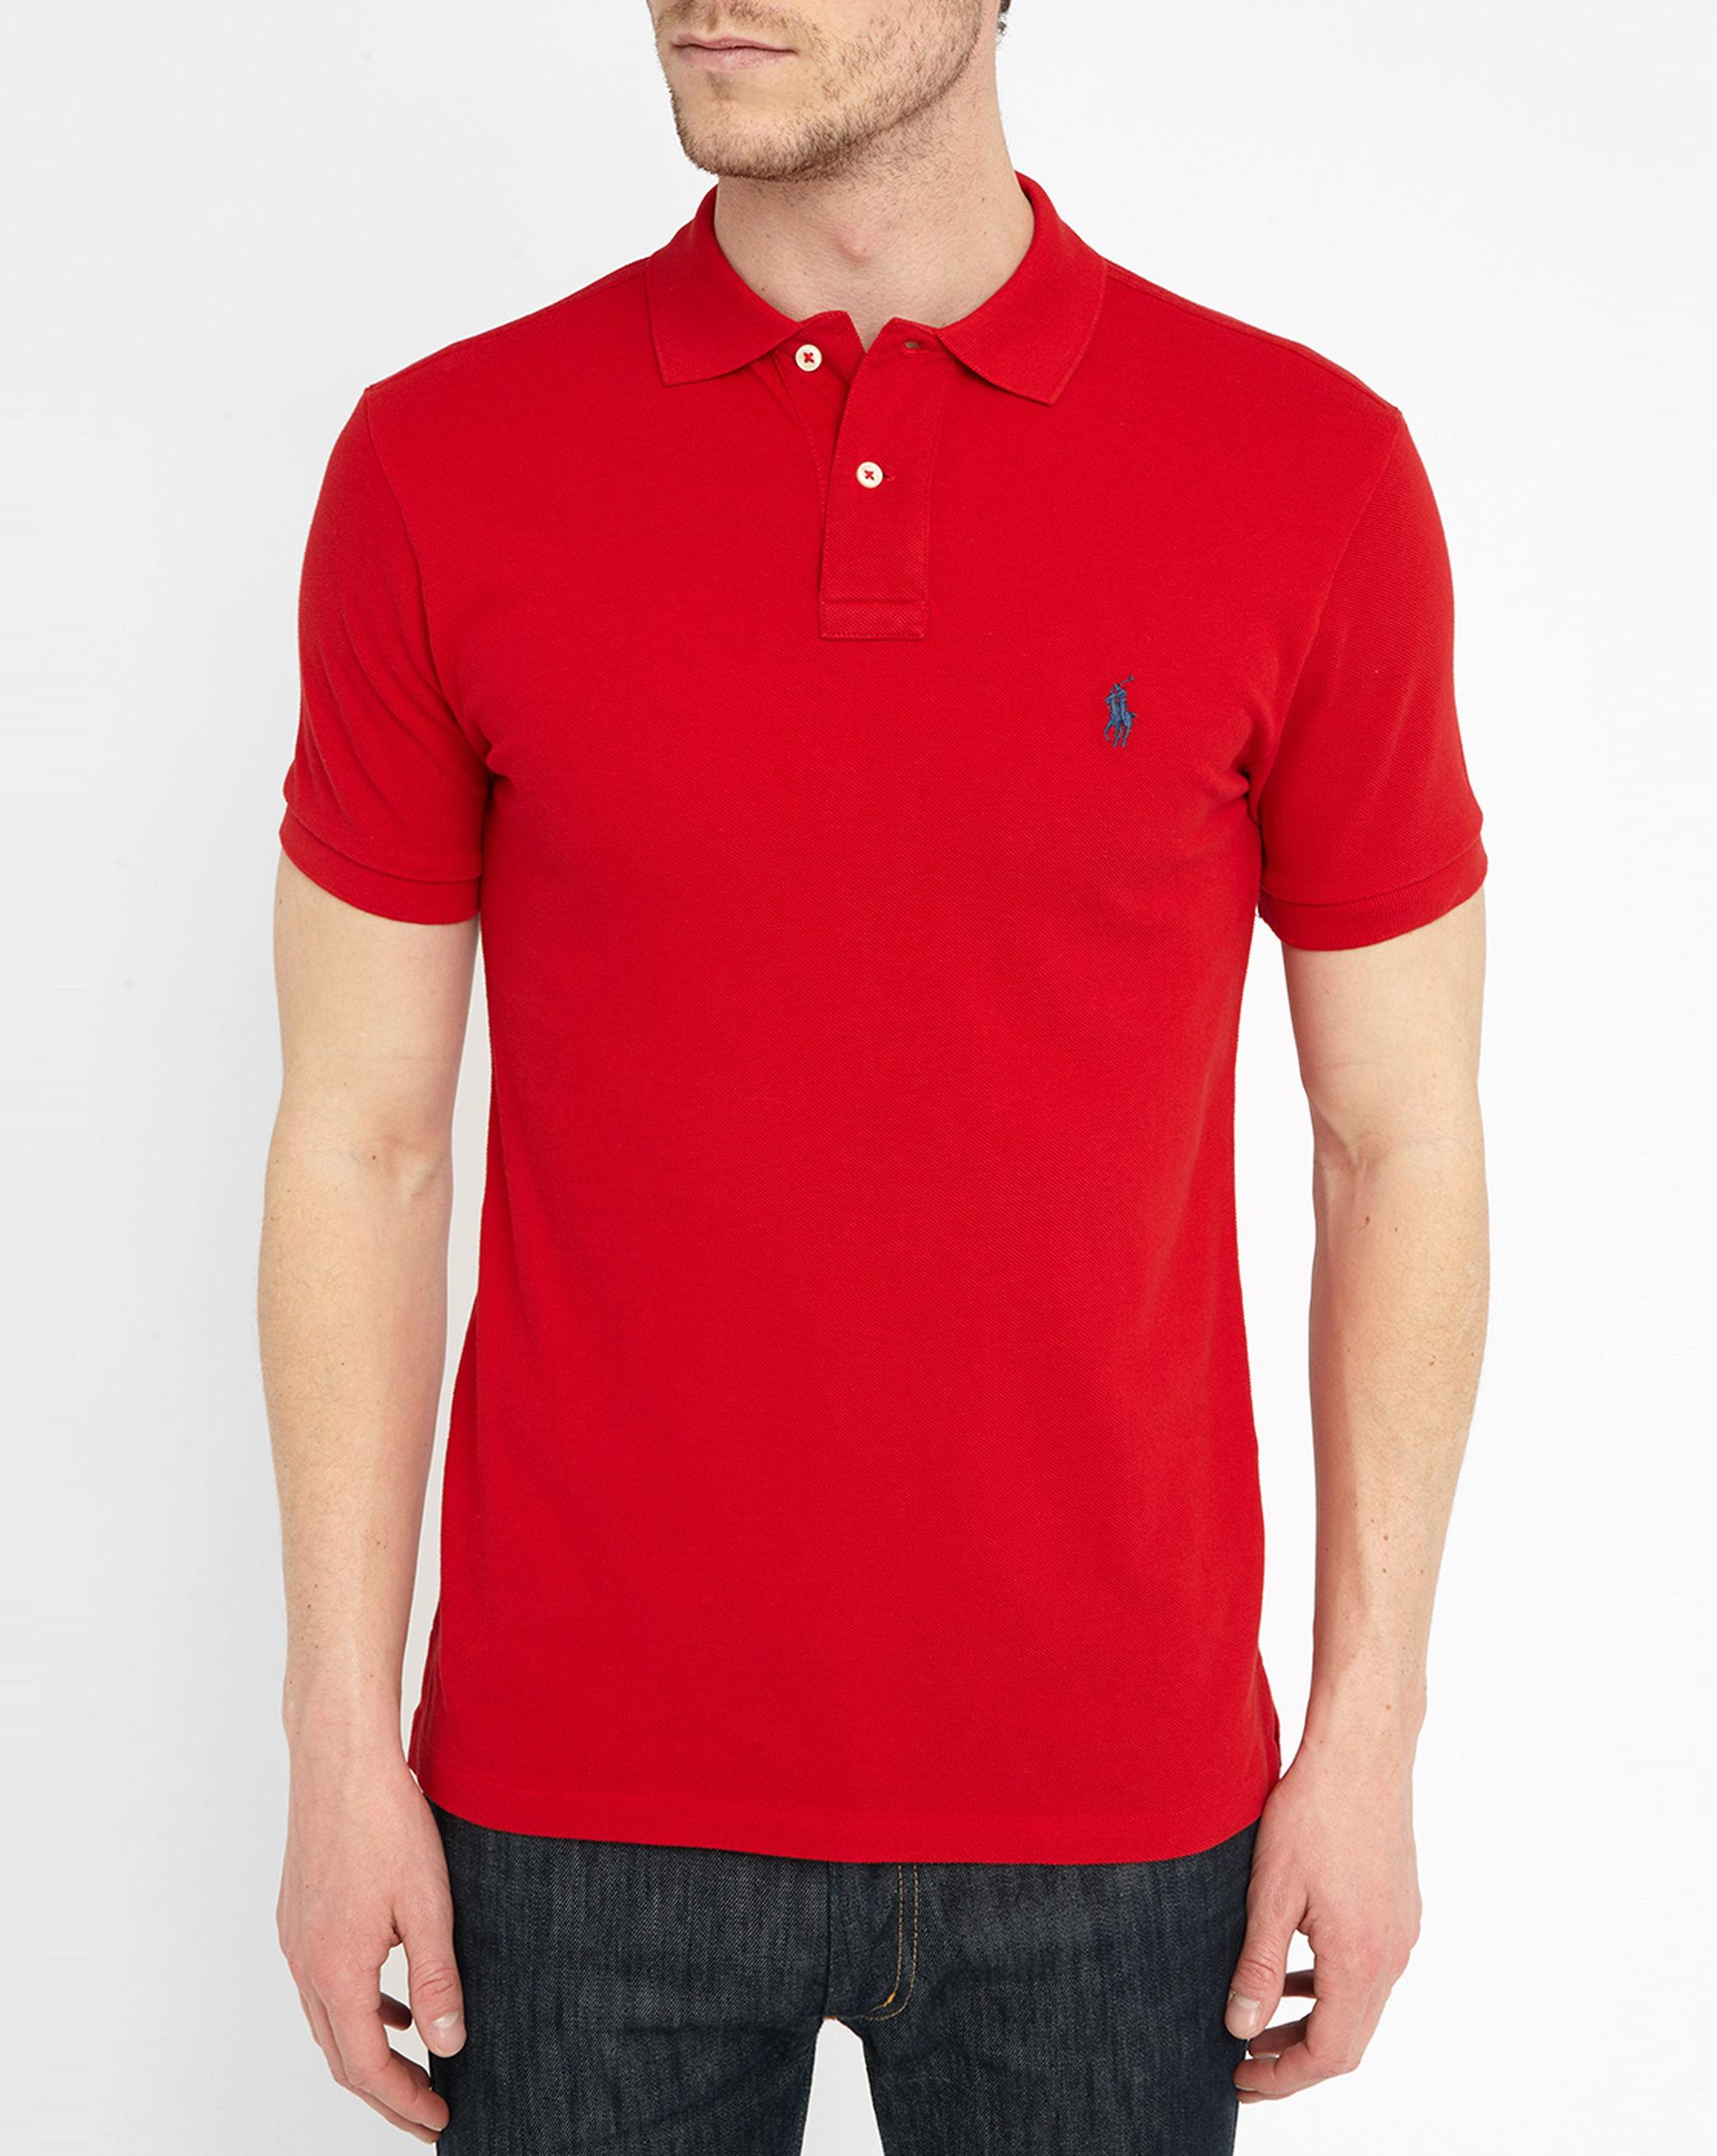  Polo  ralph lauren Slim Fit Red Polo Shirt  in Red  for Men 